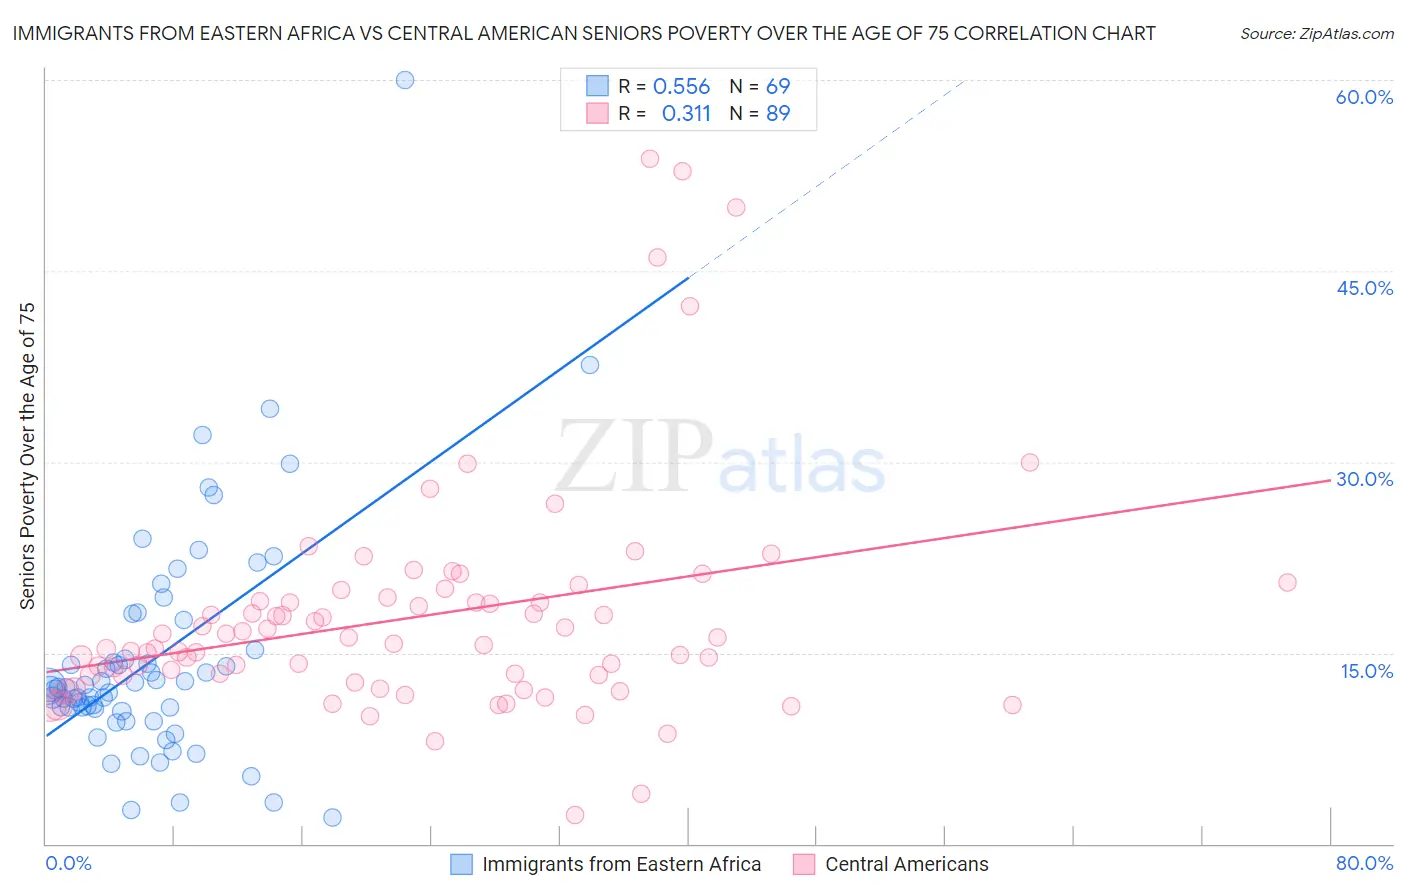 Immigrants from Eastern Africa vs Central American Seniors Poverty Over the Age of 75